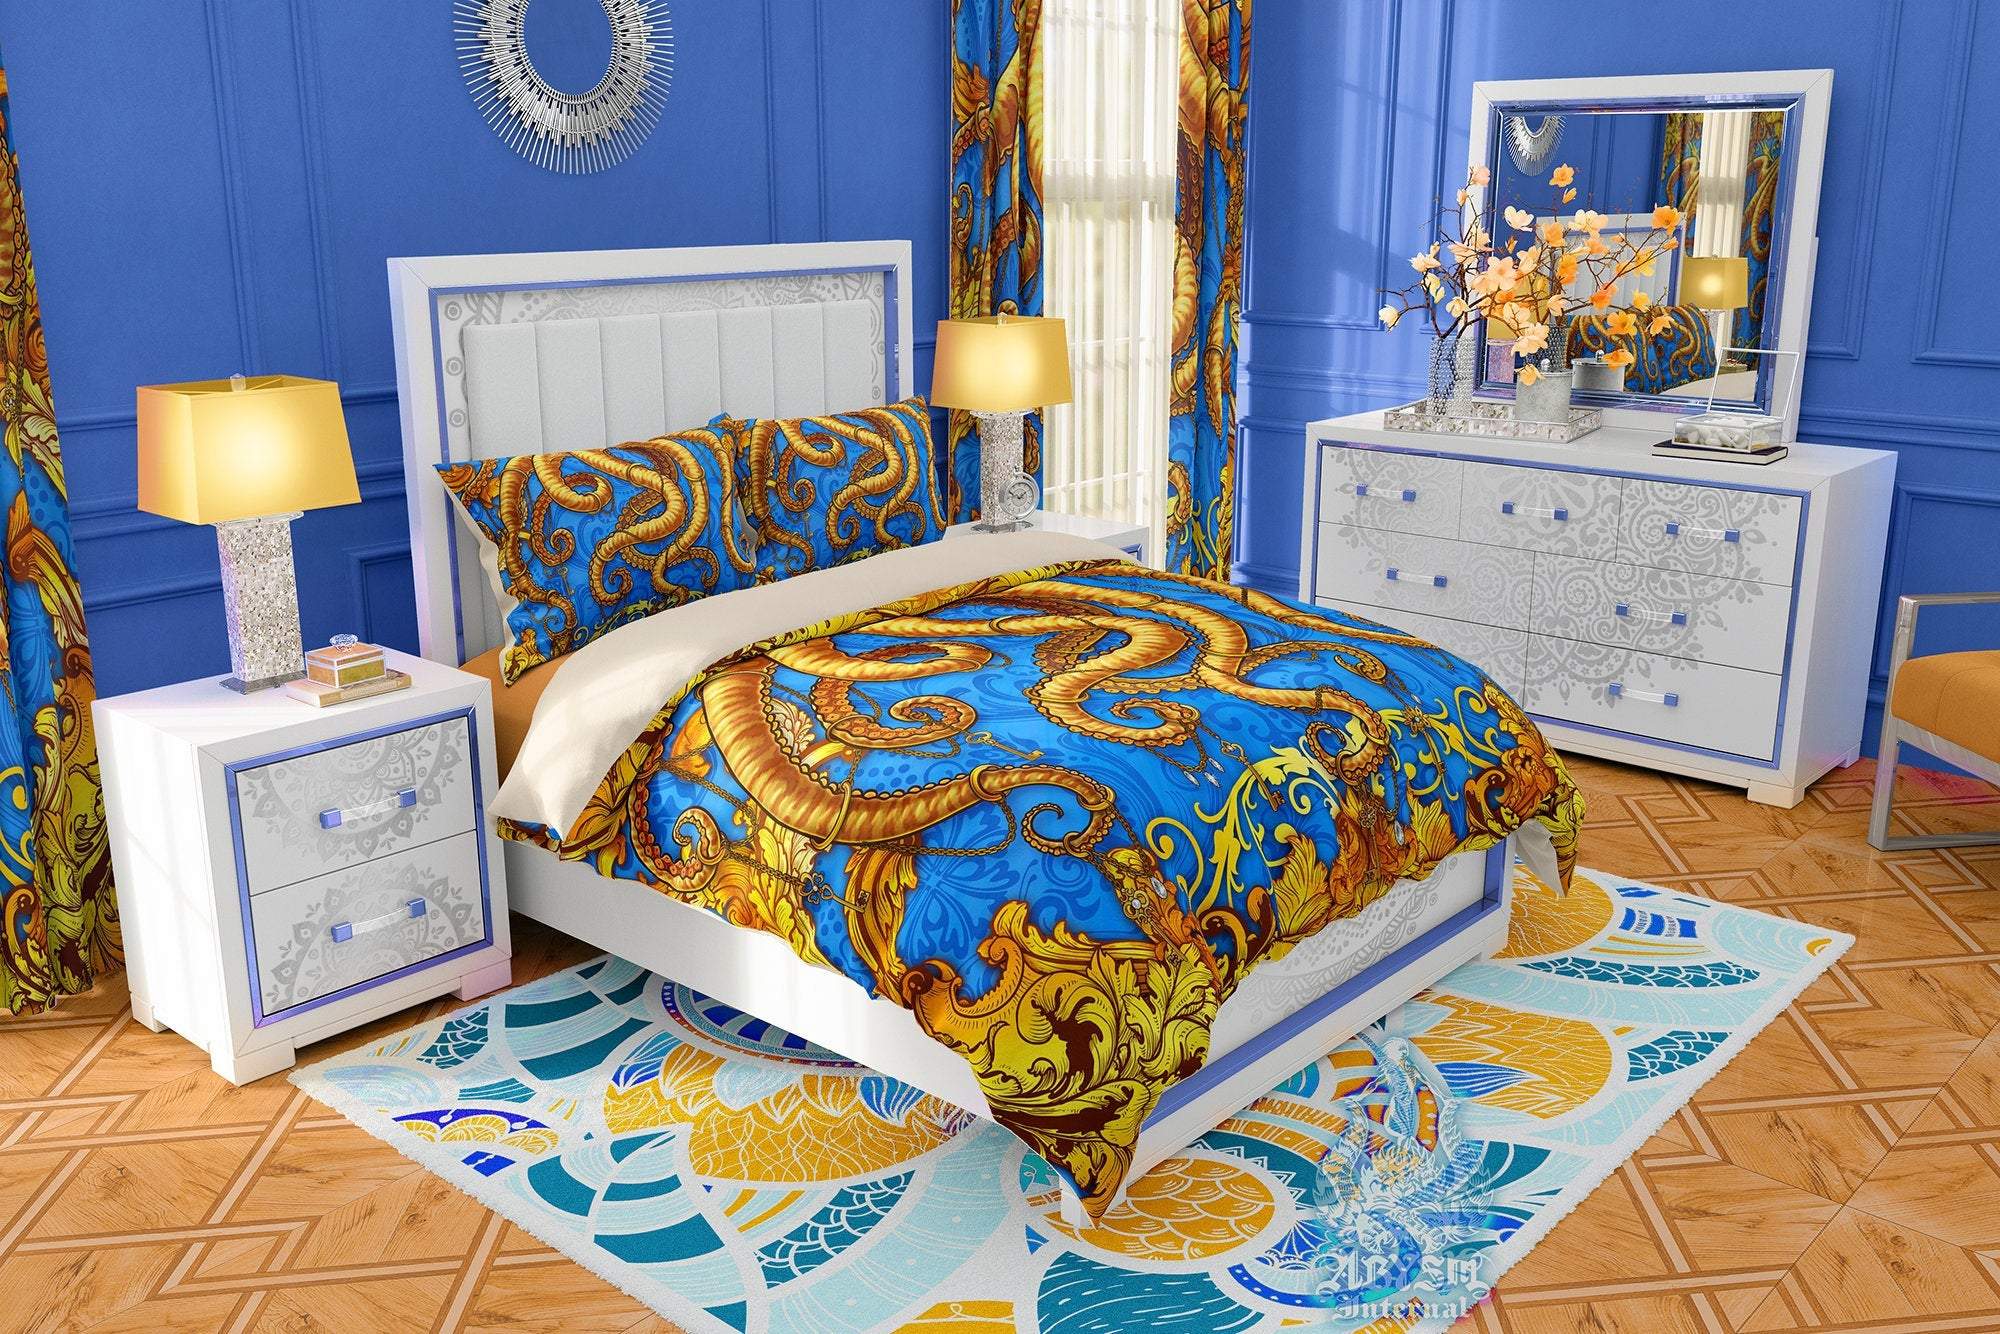 Octopus Bedding Set, Comforter and Duvet, Victorian Bed Cover, Coastal Bedroom Decor, King, Queen and Twin Size - Gold and Cyan - Abysm Internal